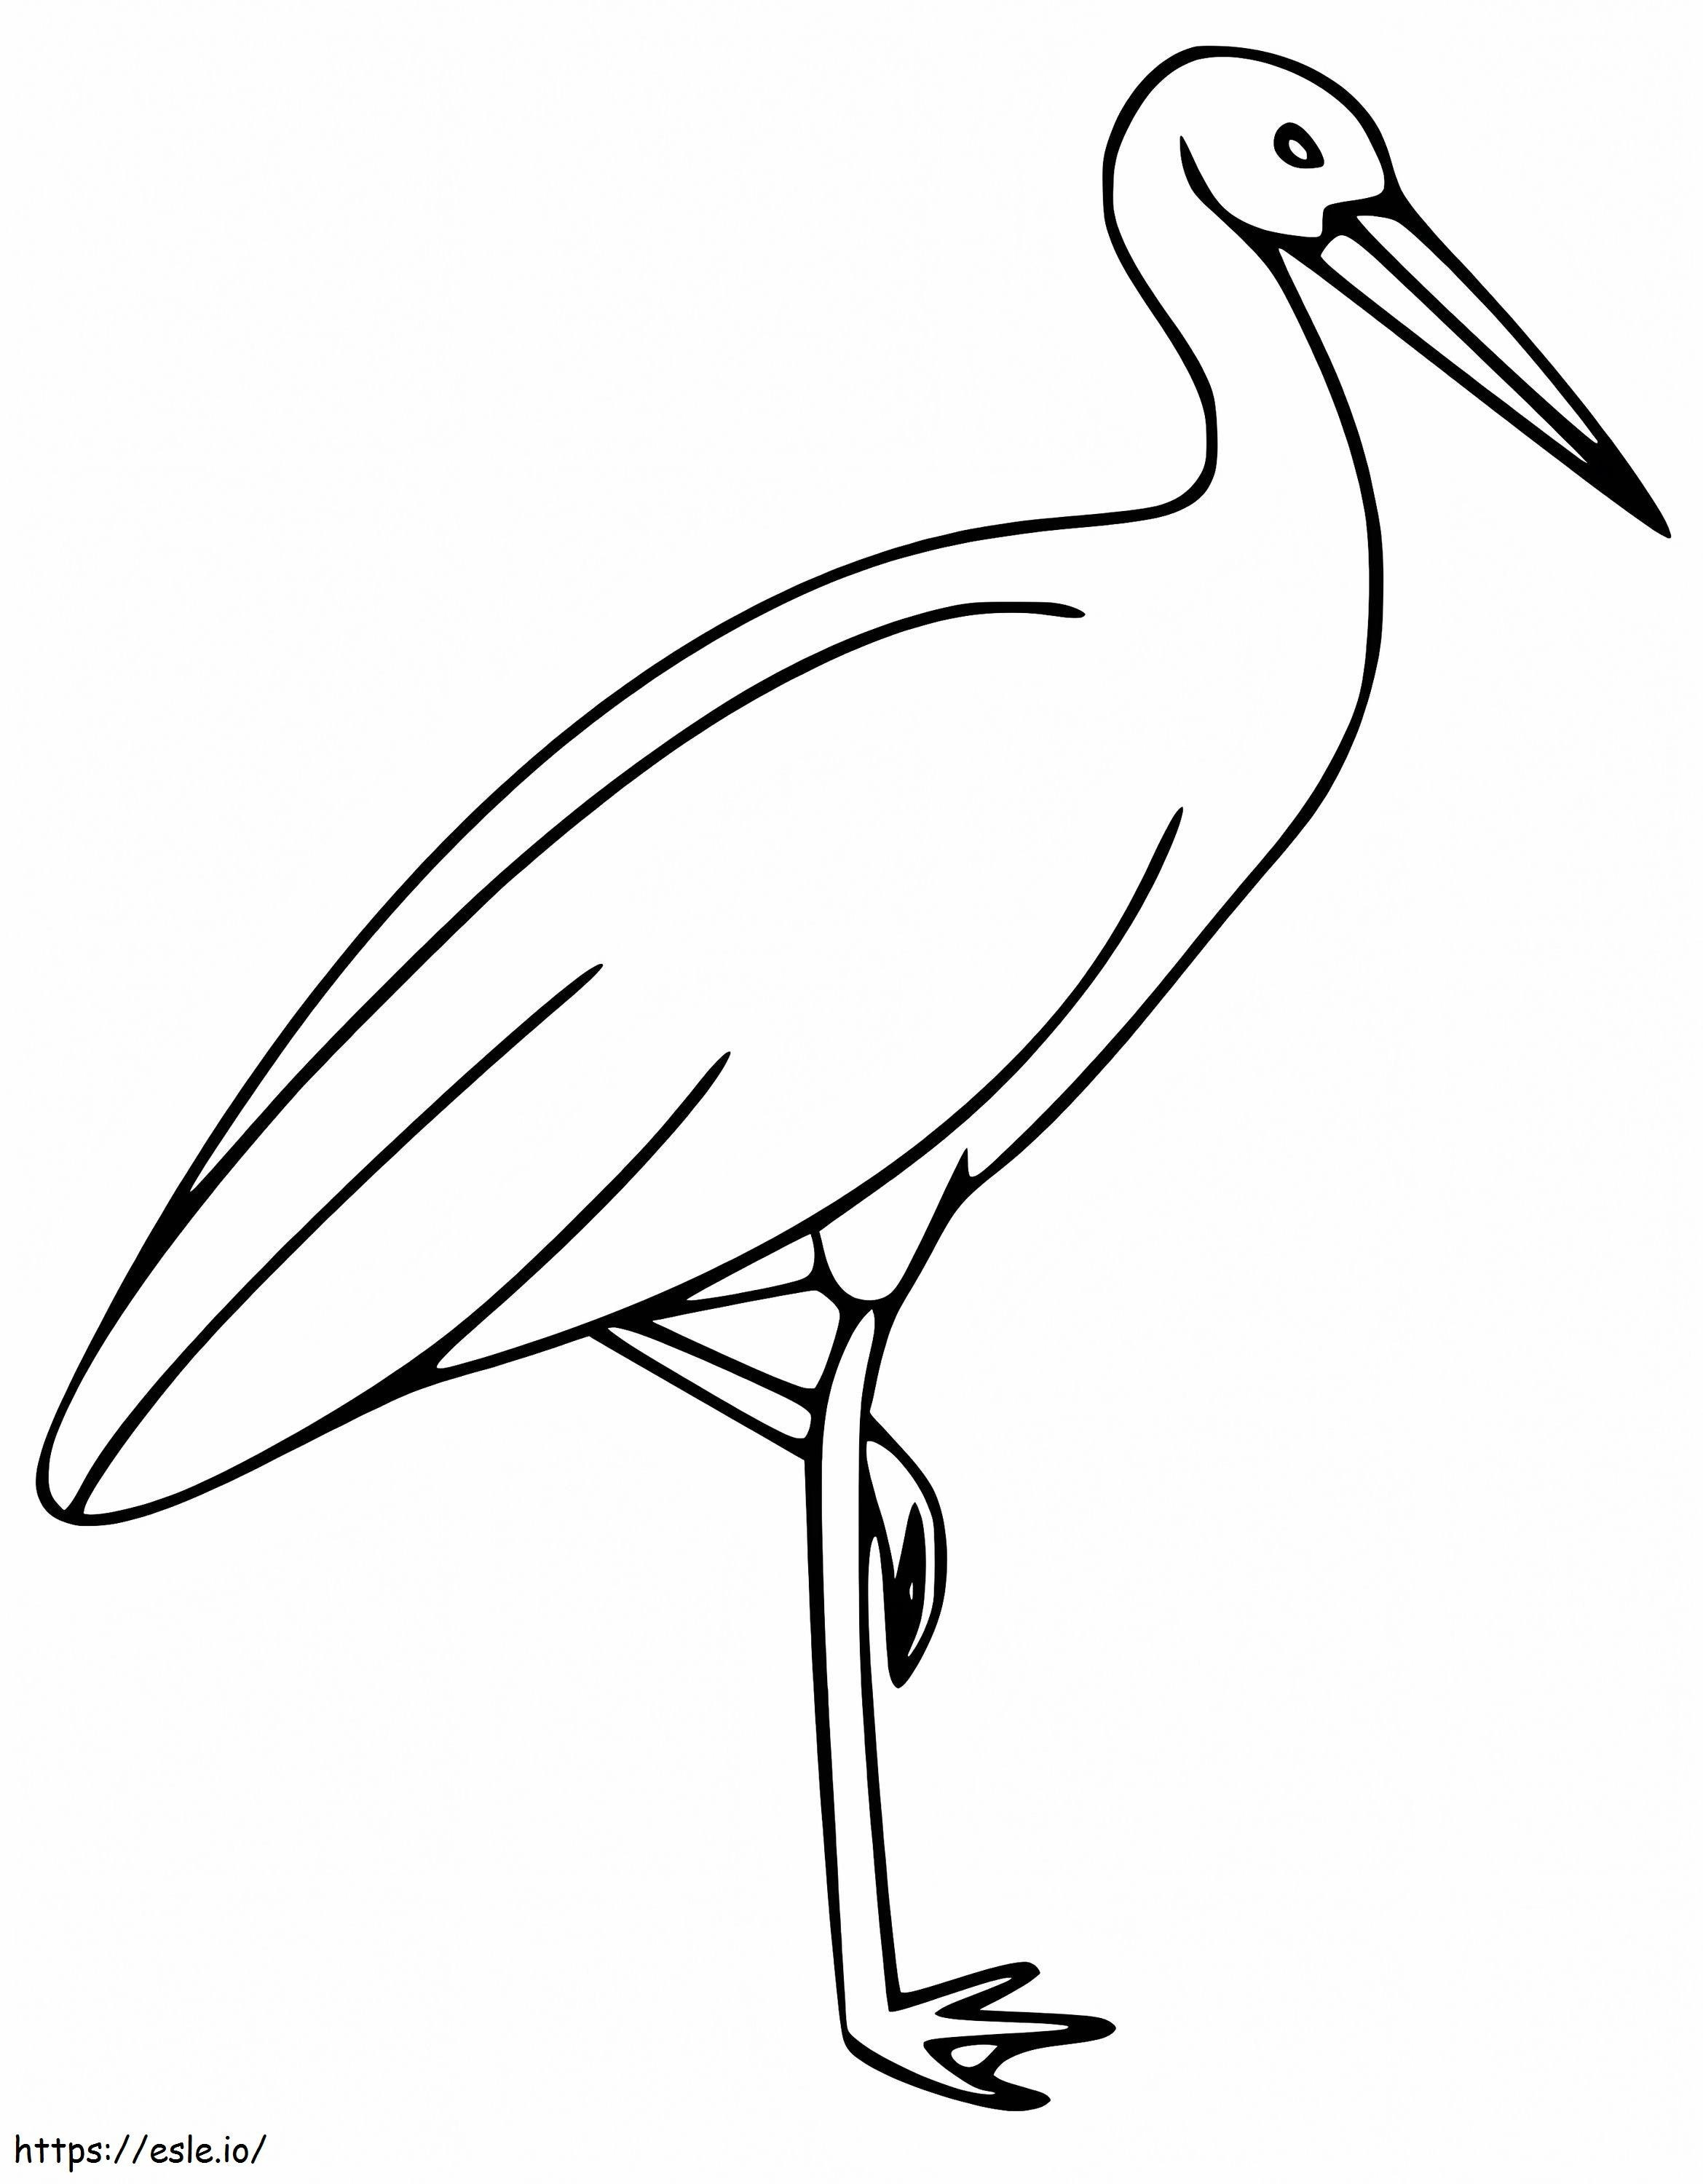 Easy Stork coloring page